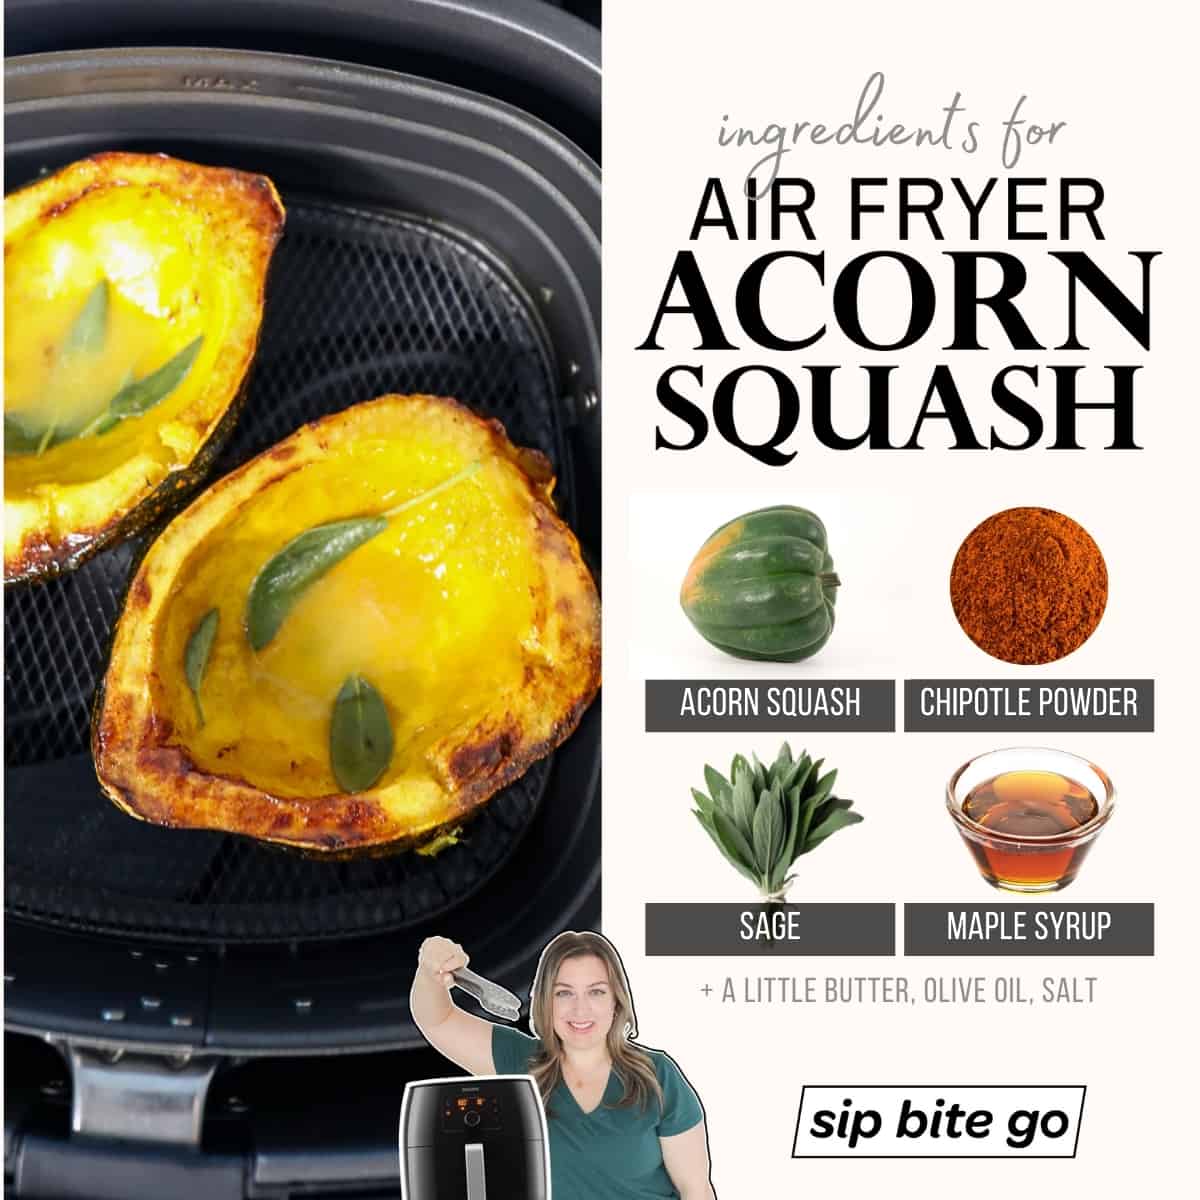 Infographic with ingredients for making Air Fryer Acorn Squash